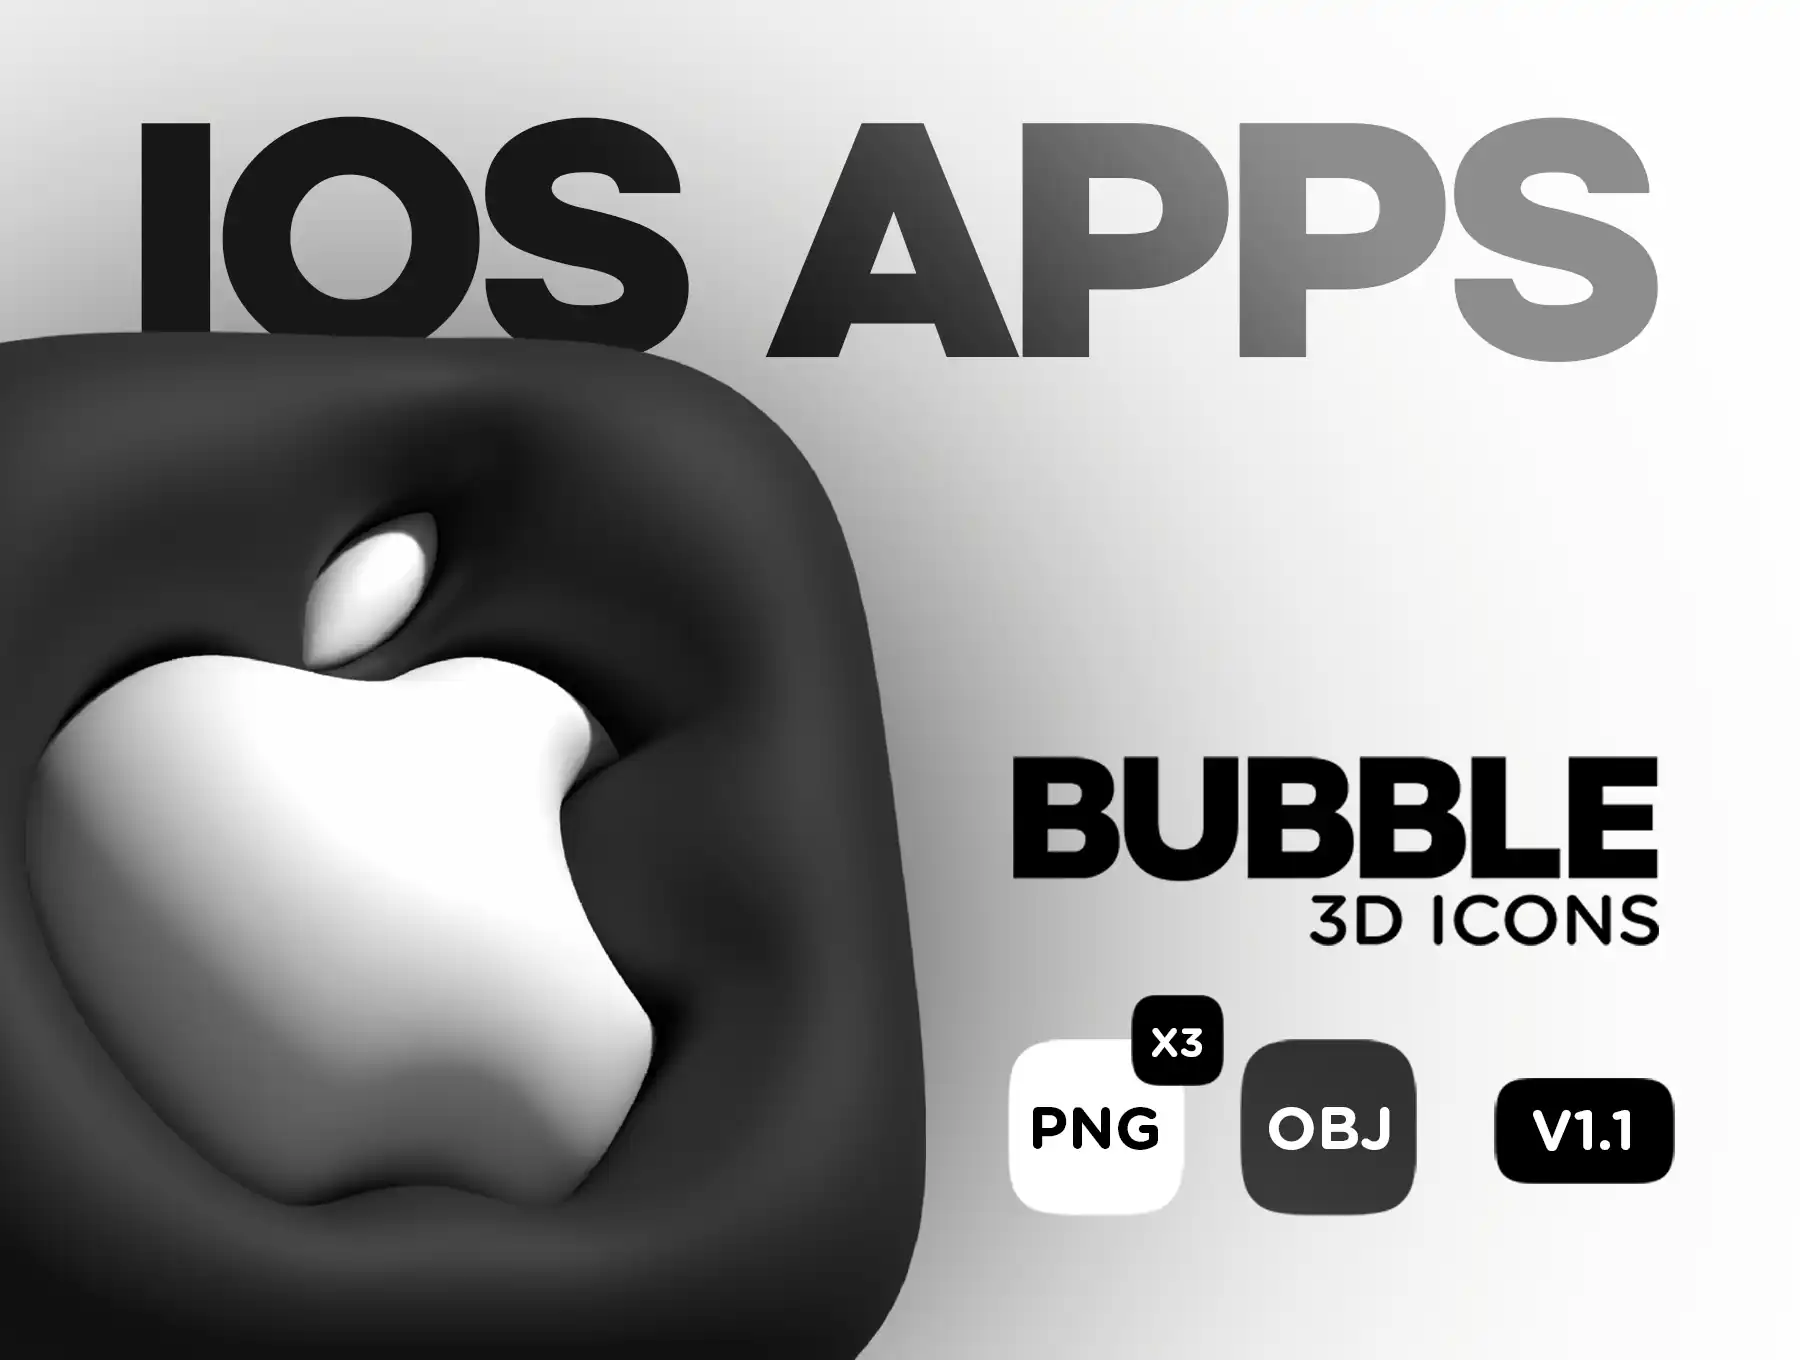 3D Bubble Pack - IOS Applications icons - OBJ